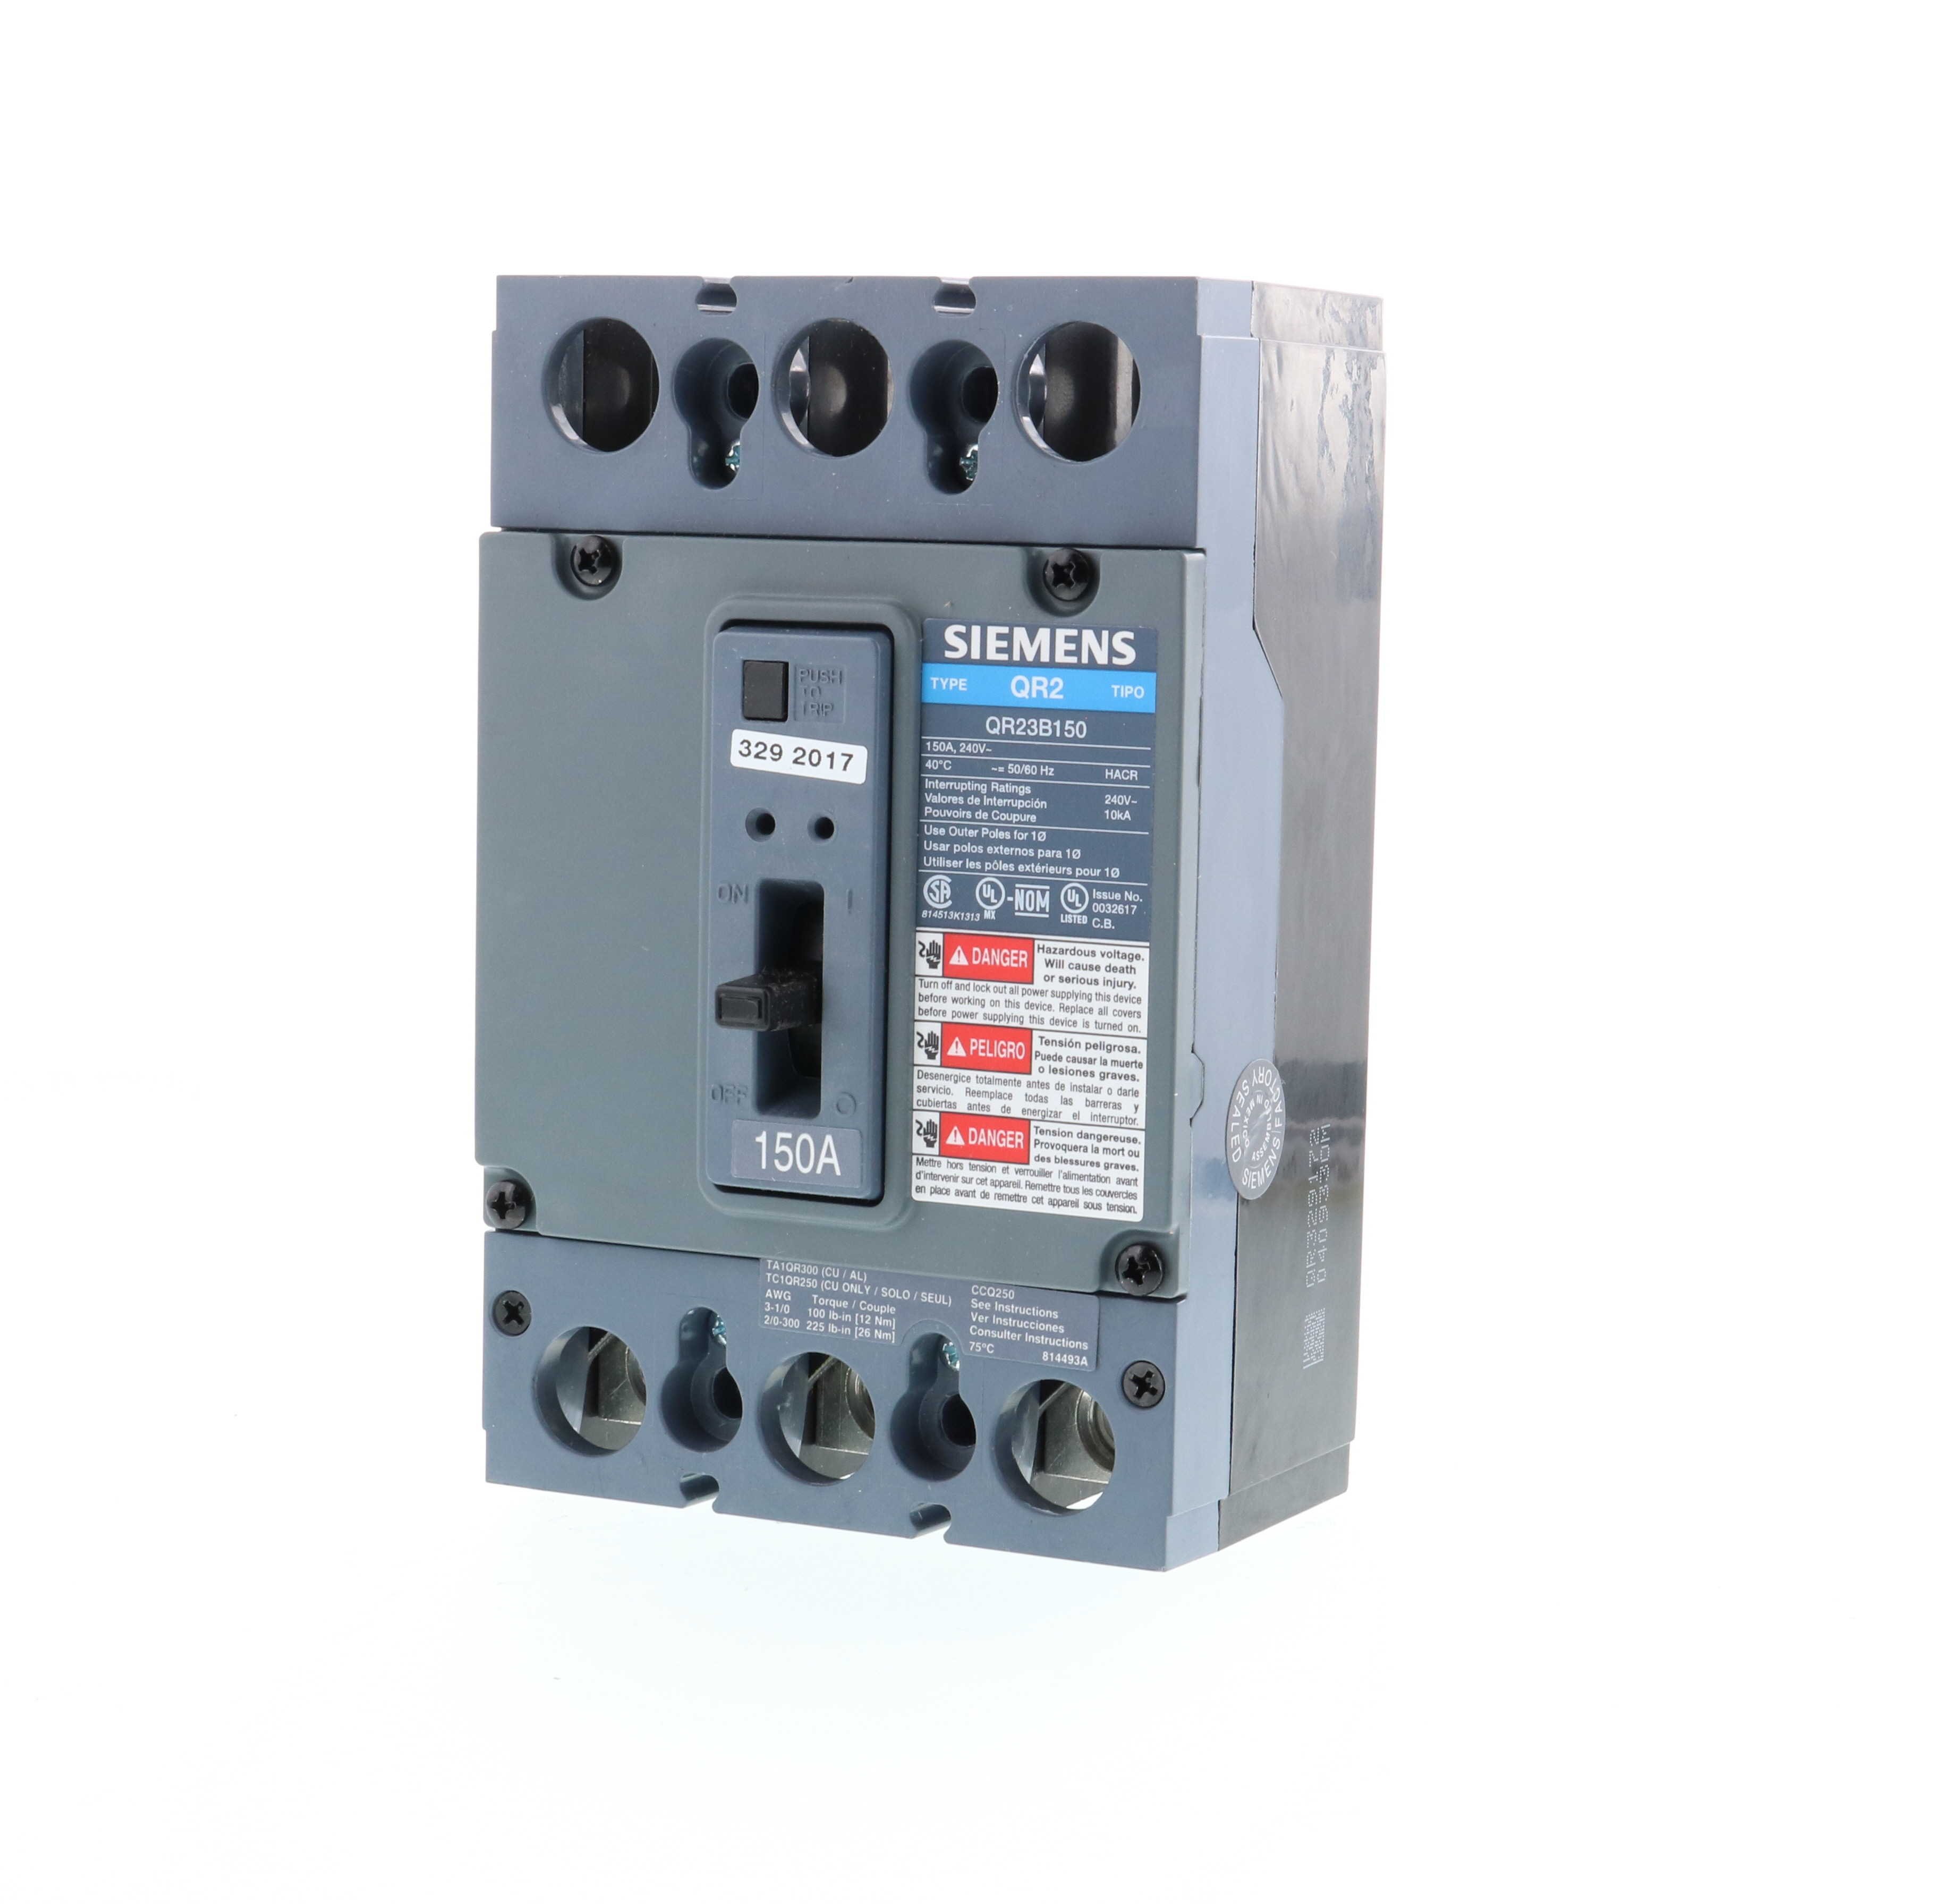 SIEMENS LOW VOLTAGE MOLDED CASE CIRCUIT BREAKER WITH THERMAL - MAGNETIC TRIP. QR FRAME STANDARD 40C BREAKER. 150A 3-POLE (10KA AT 240V). SPECIAL FEATURES NO LUGS INSTALLED.